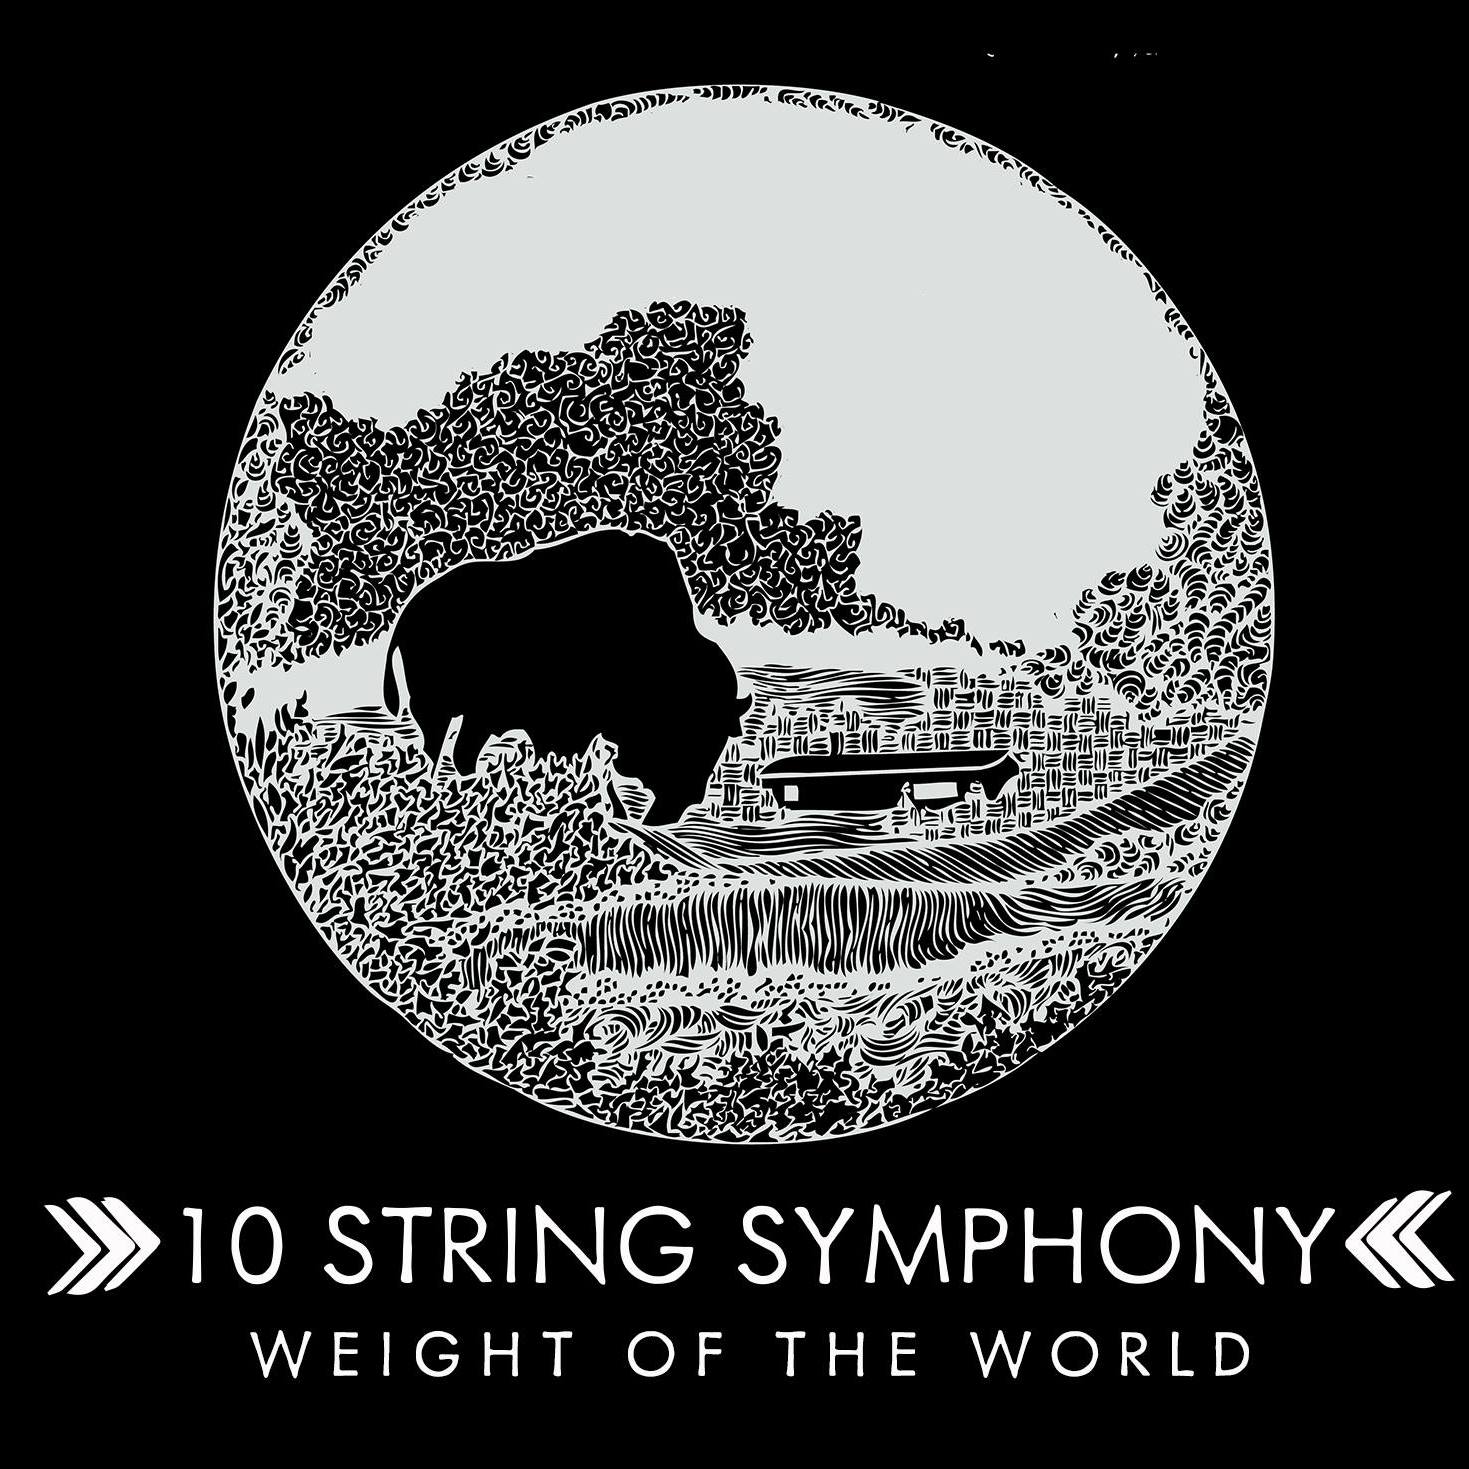 10 String Symphony: Weight Of The World